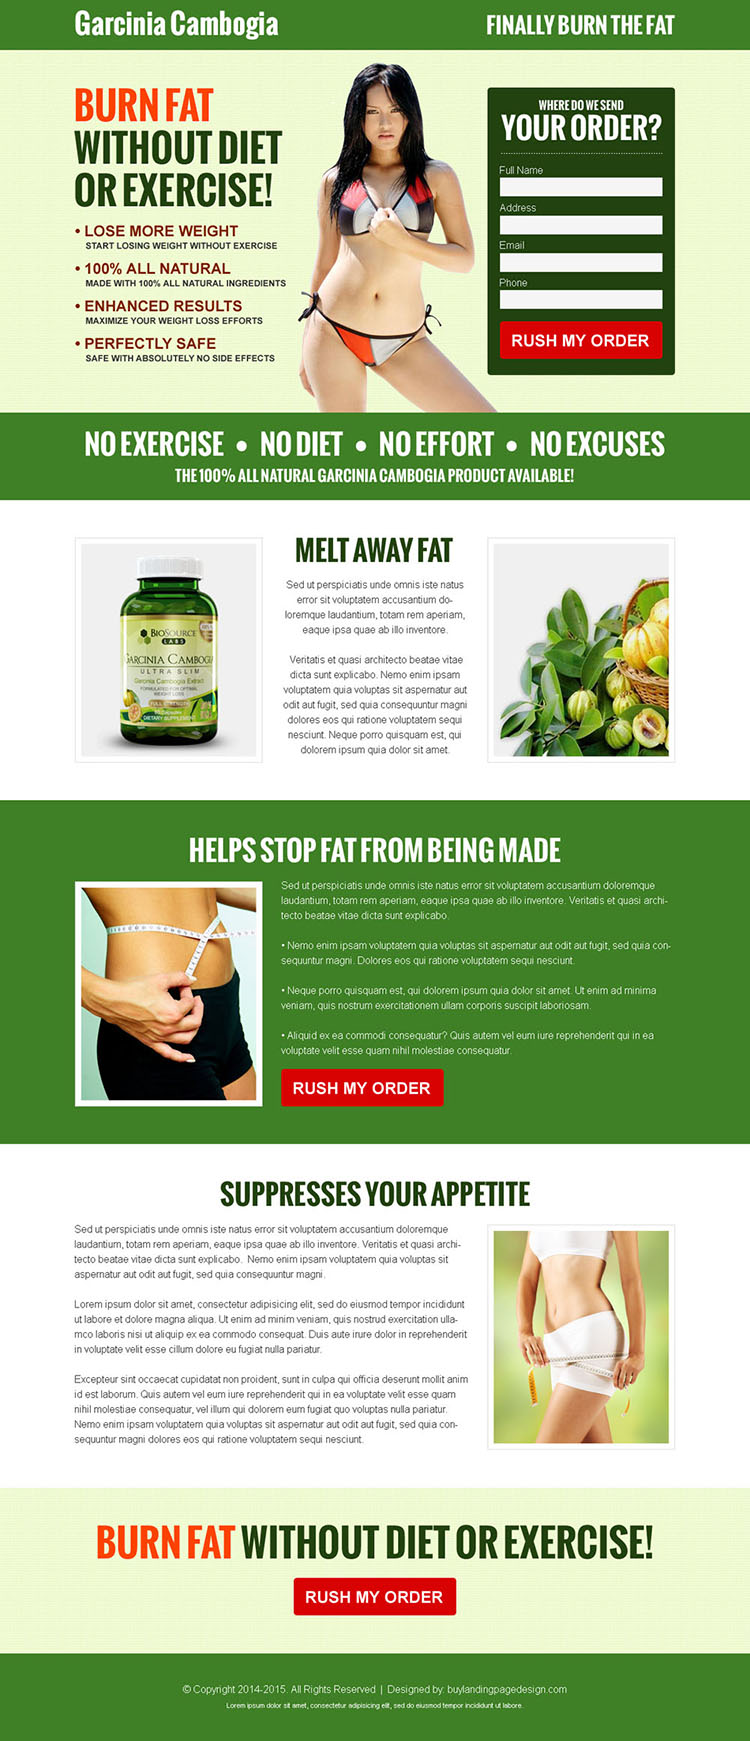 garcinia cambogia responsive lead capture landing page design to increase your product sales